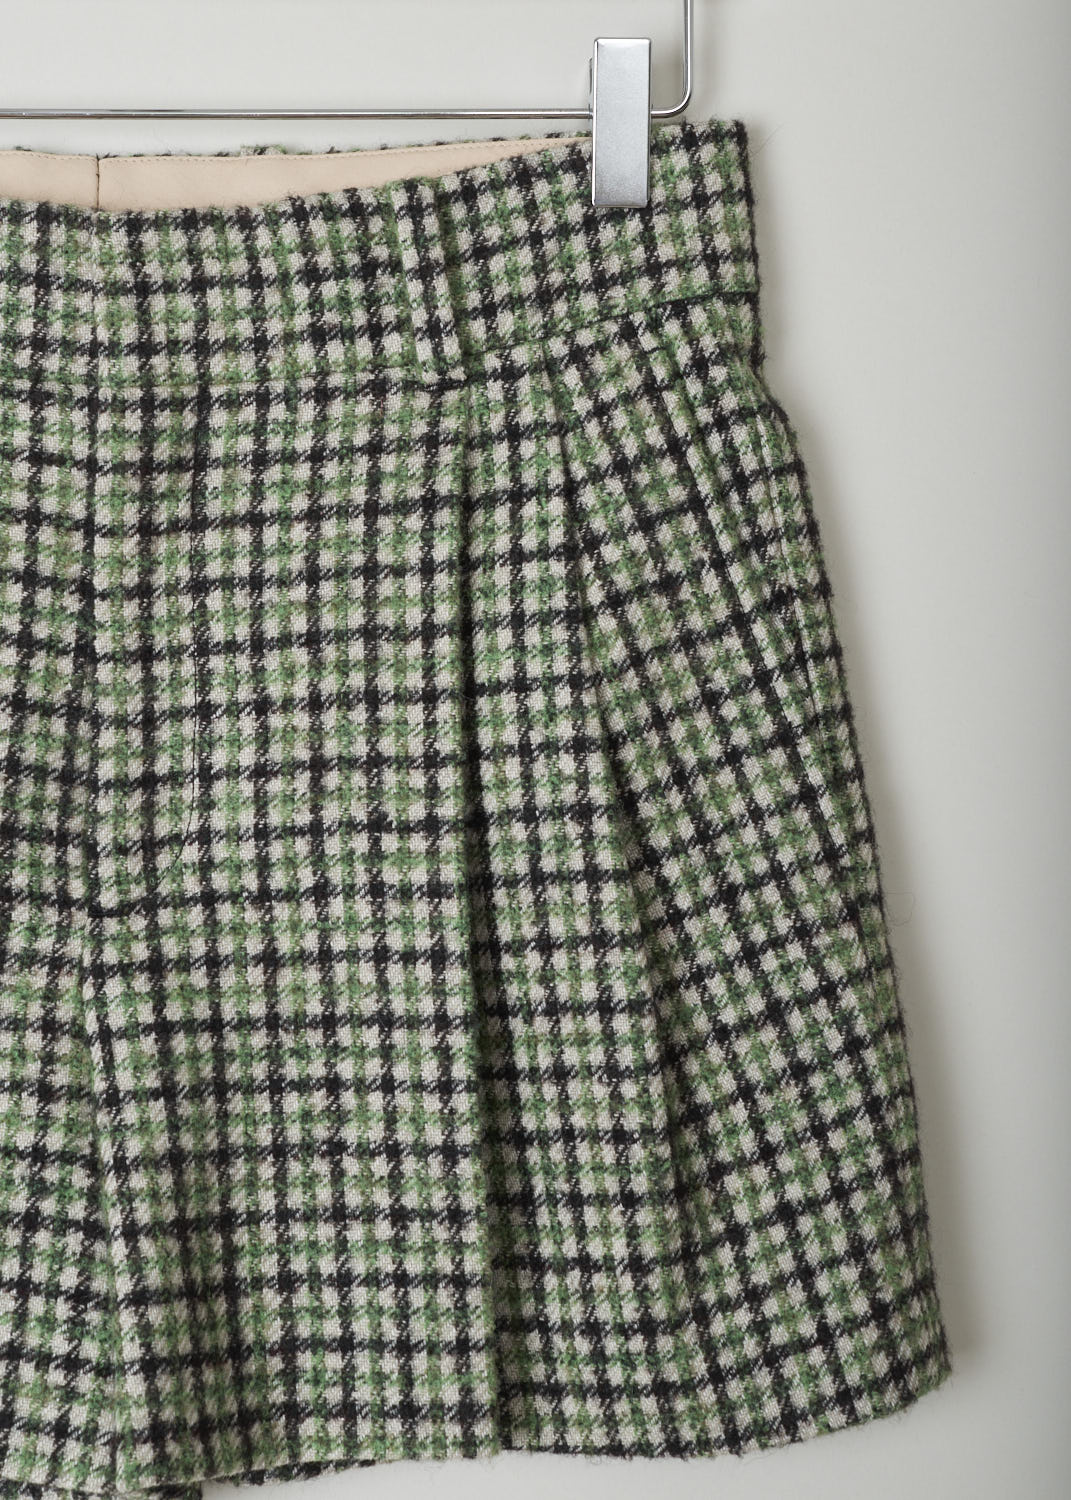 CHLOÃ‰, VIBRANT GREEN CHECK SHORTS, CHC21ASH2106439T38, Green, Print, Detail, These beautiful vibrant green check shorts are soft to the touch. There is a concealed front closure with two hooks and a zipper and the shorts also have belt loops. The front of the shorts is decorated with pleats. Two forward slanted pockets can also be found in the front and two welt pockets on the back. 